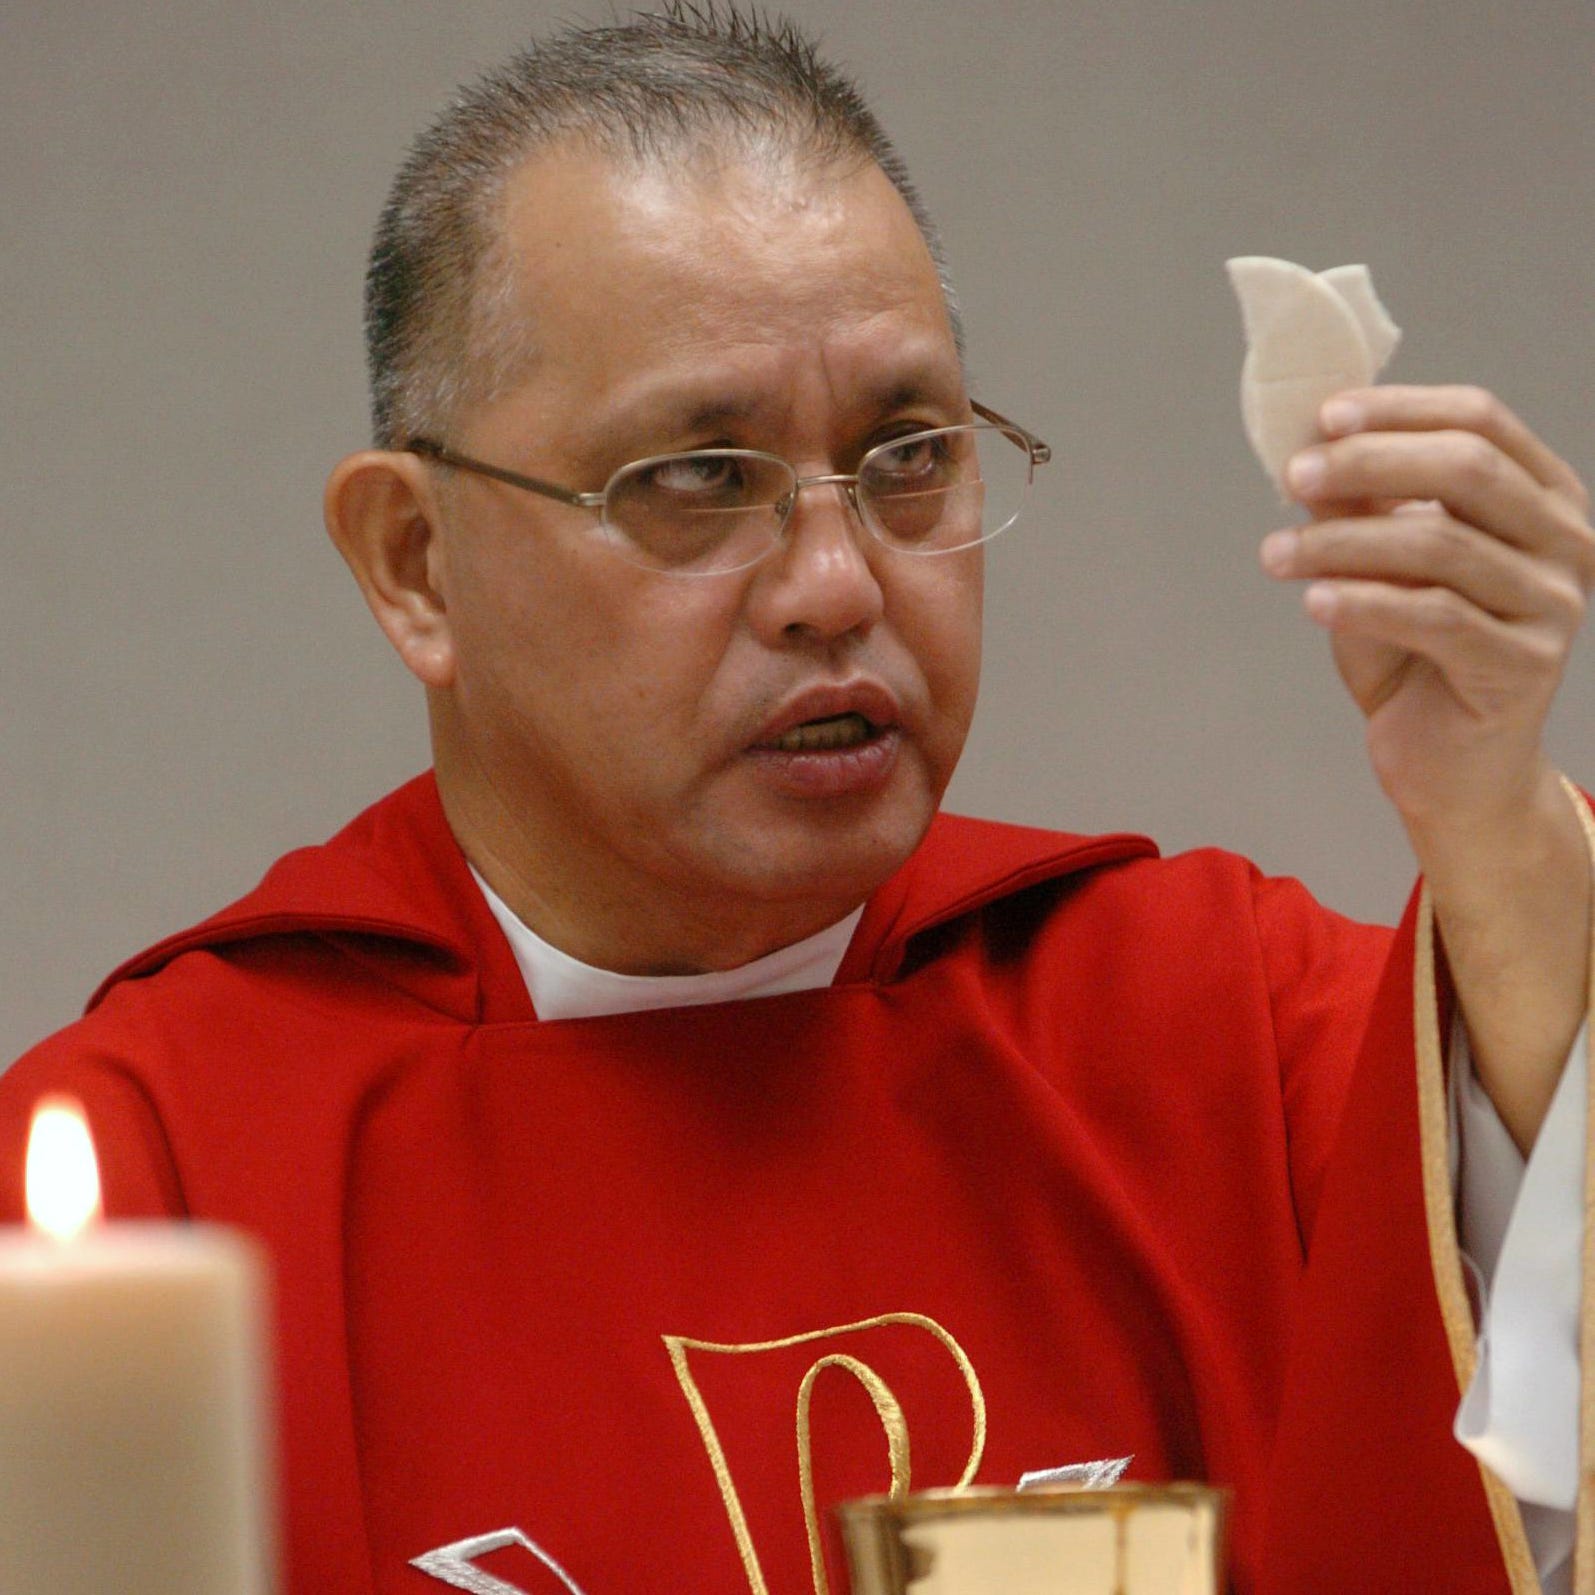 The Rev. Edmundo Paredes prepares for communion June 5, 2008, at St. Cecilia Catholic Church in Dallas. Paredes, a Texas priest now accused of molesting teens and stealing from his parish, has gone missing.